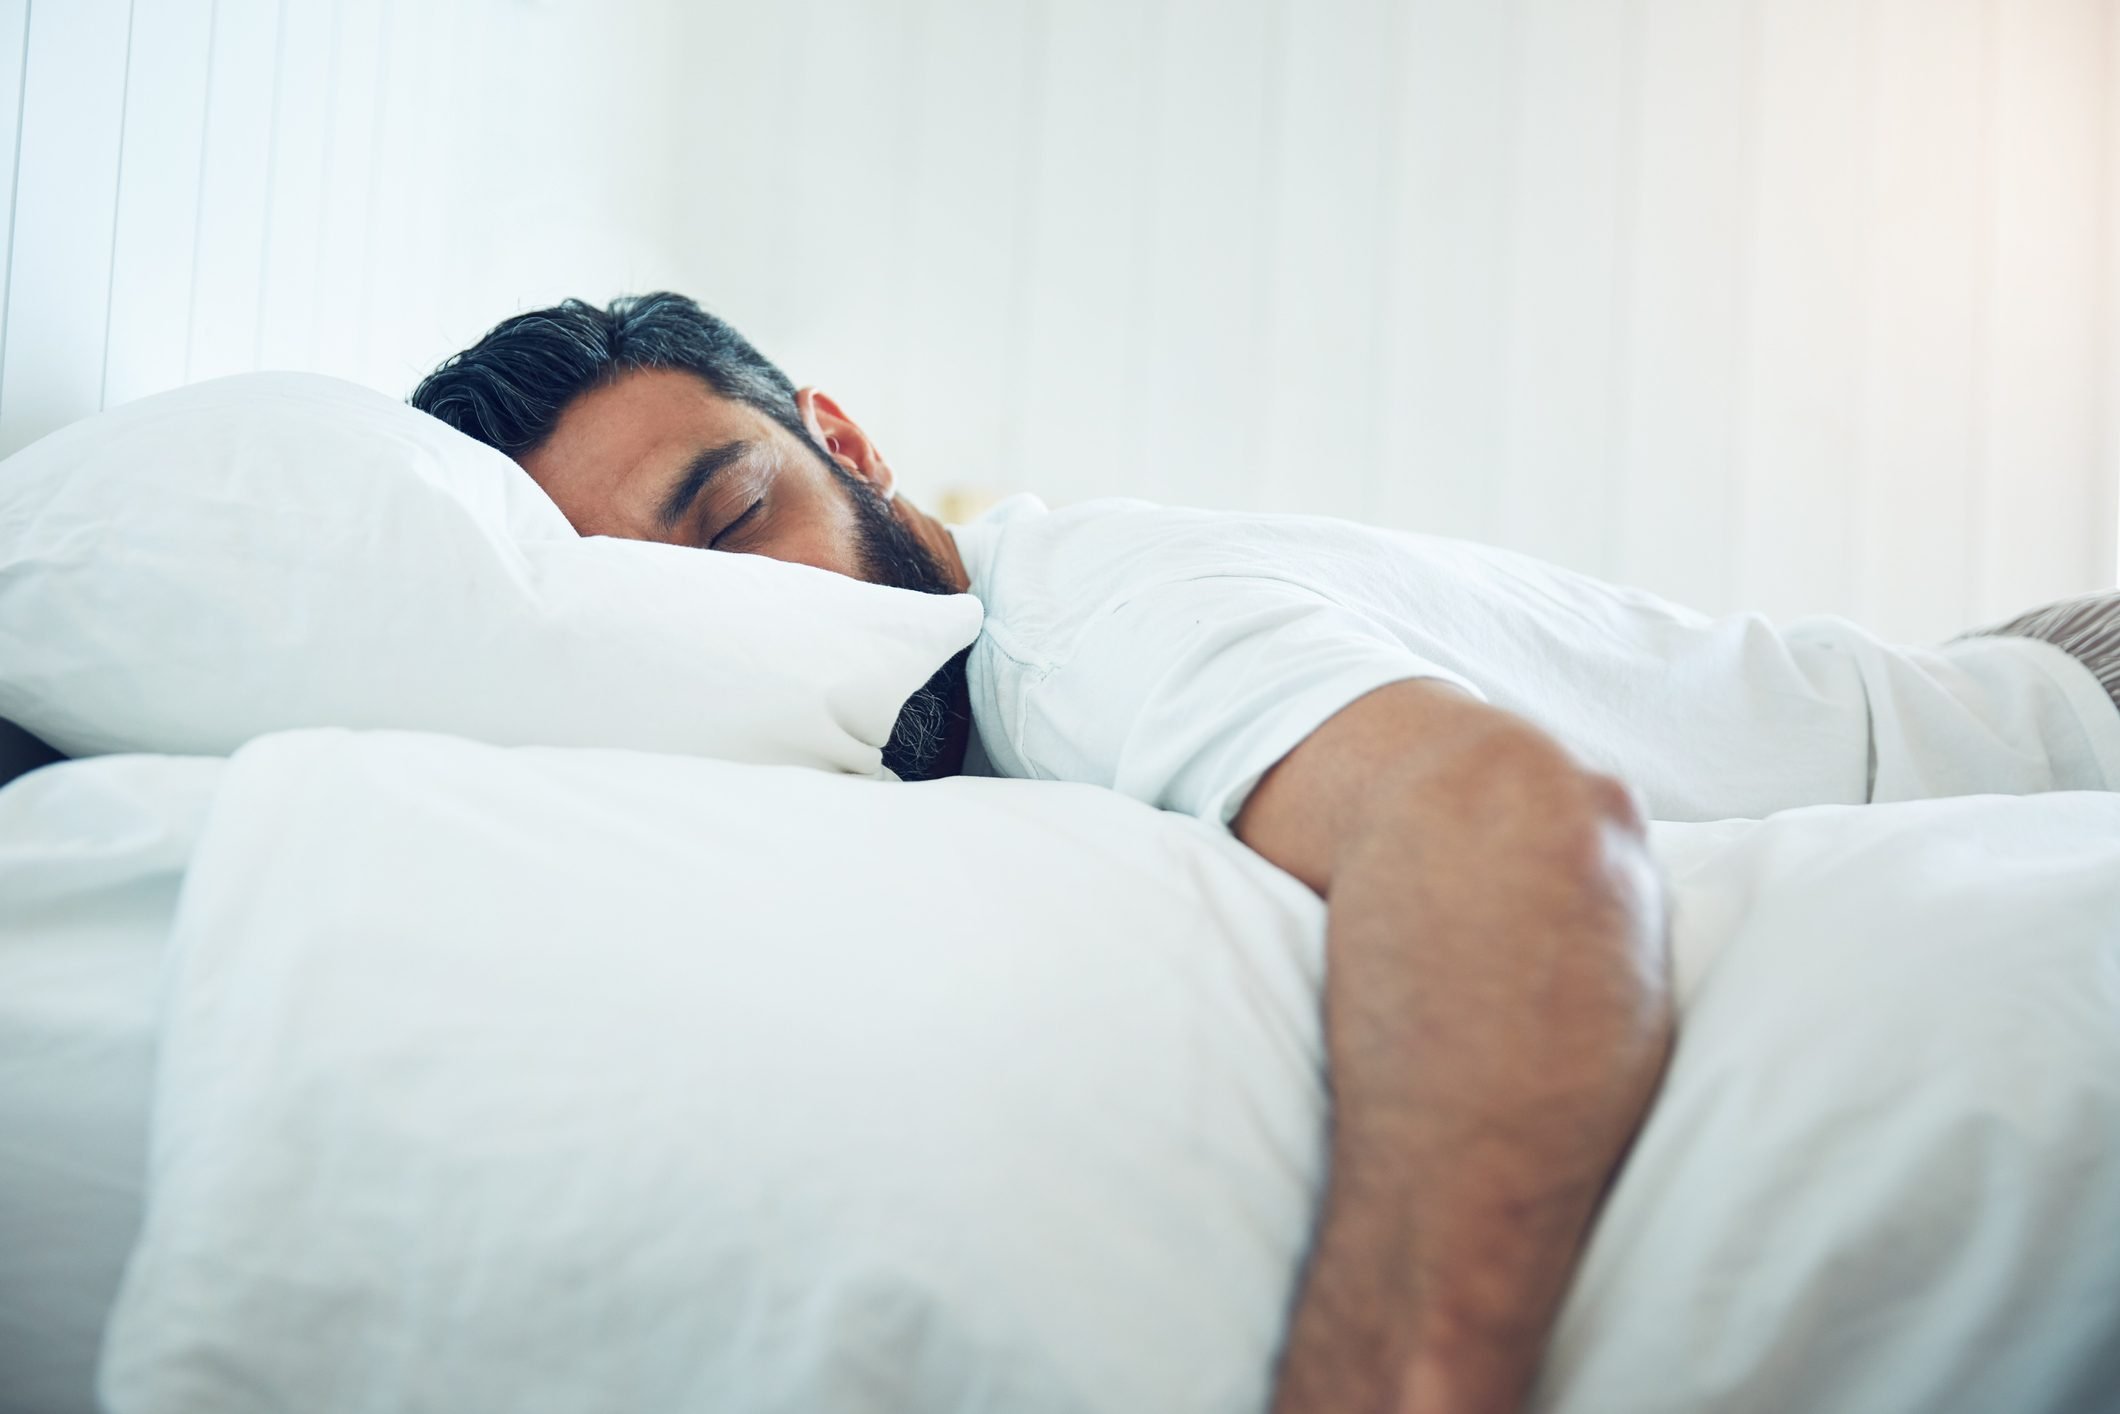 Can't Sleep? A New Study Found This Solution Was More Powerful Than Melatonin